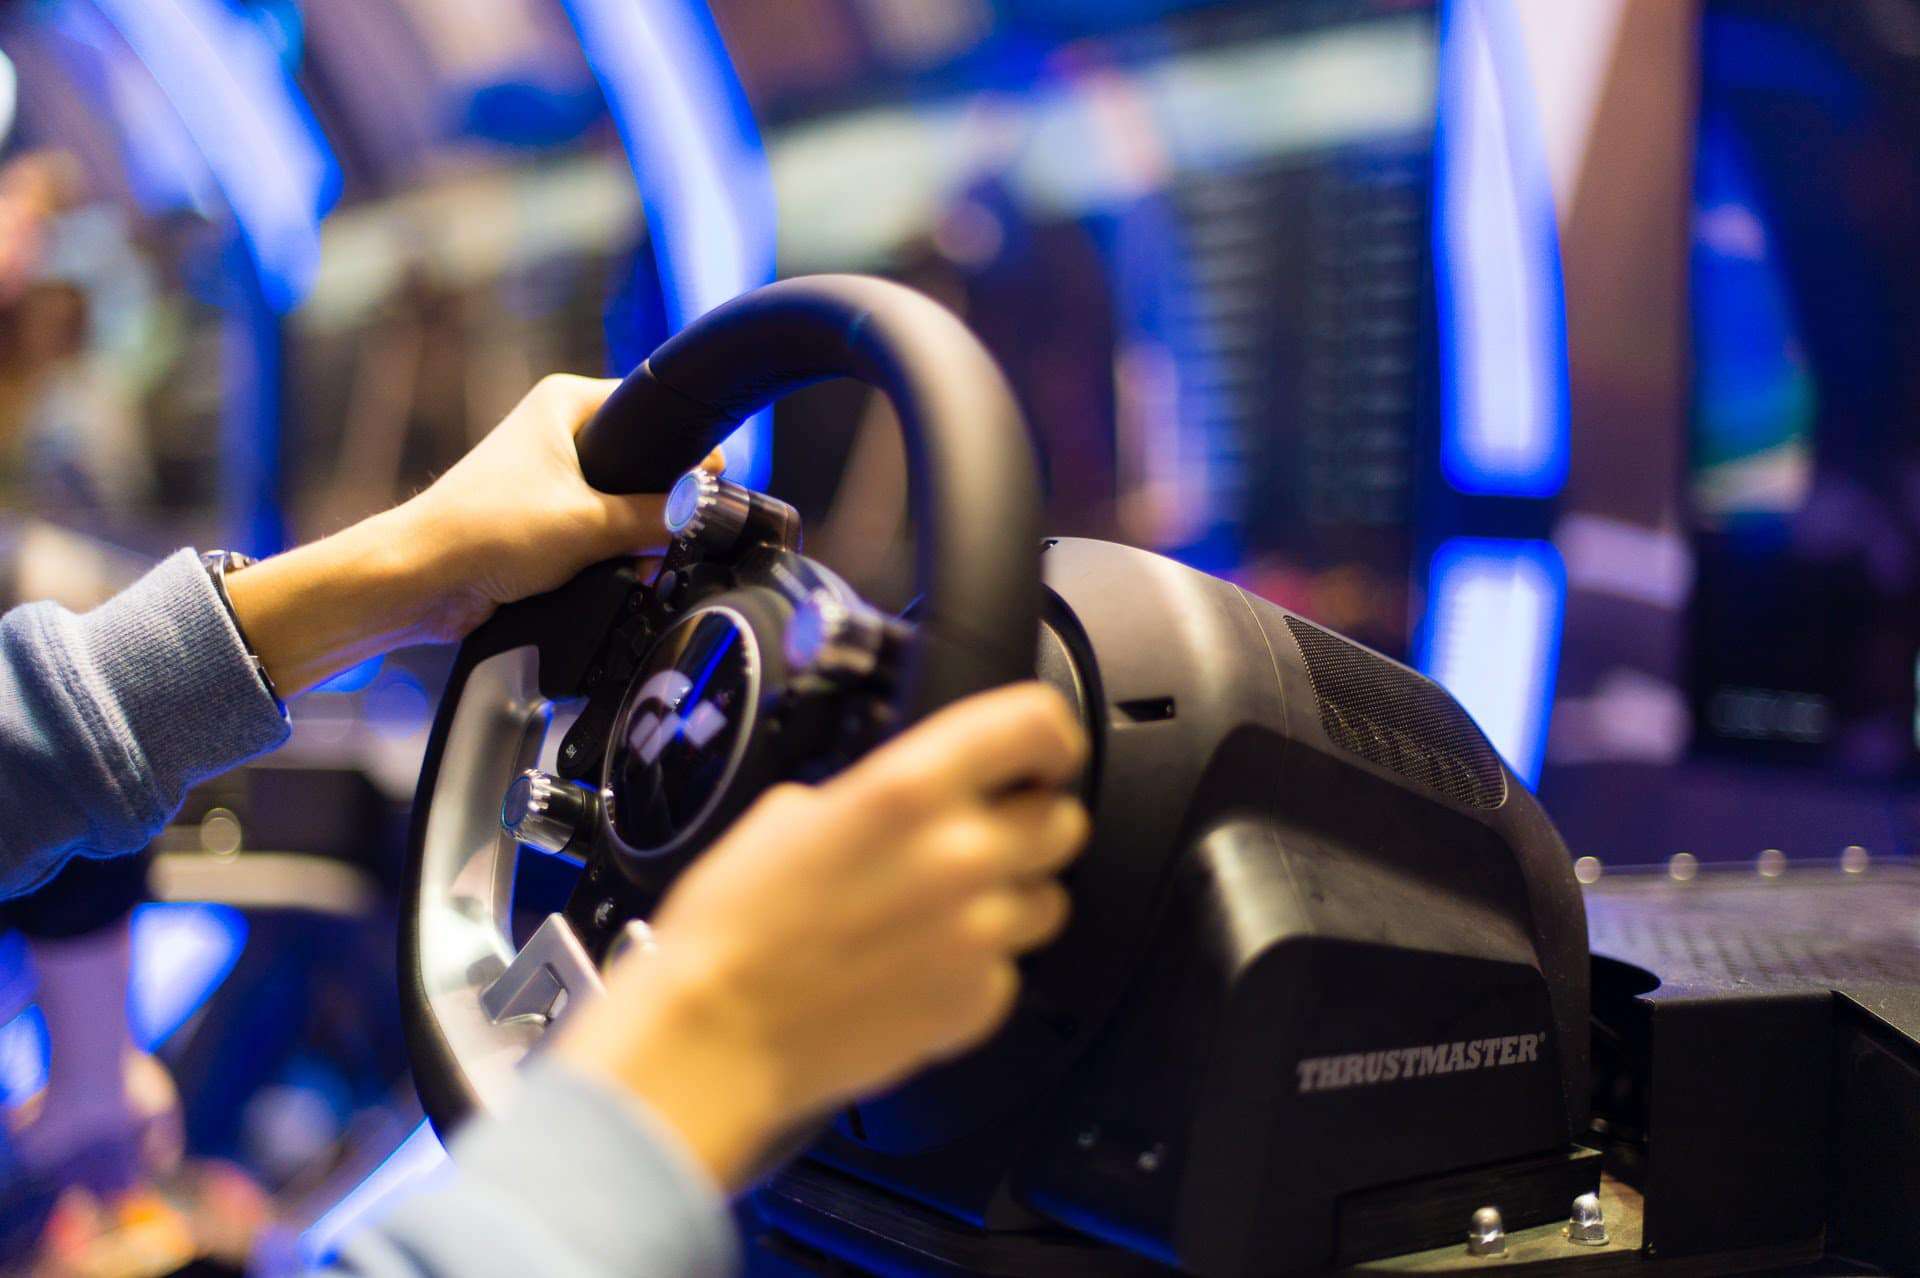 Thrustmaster, one of the worldwide leaders in racing and flight simulation video game accessories, is thrilled to reaffirm and develop its presence in the Middle East region